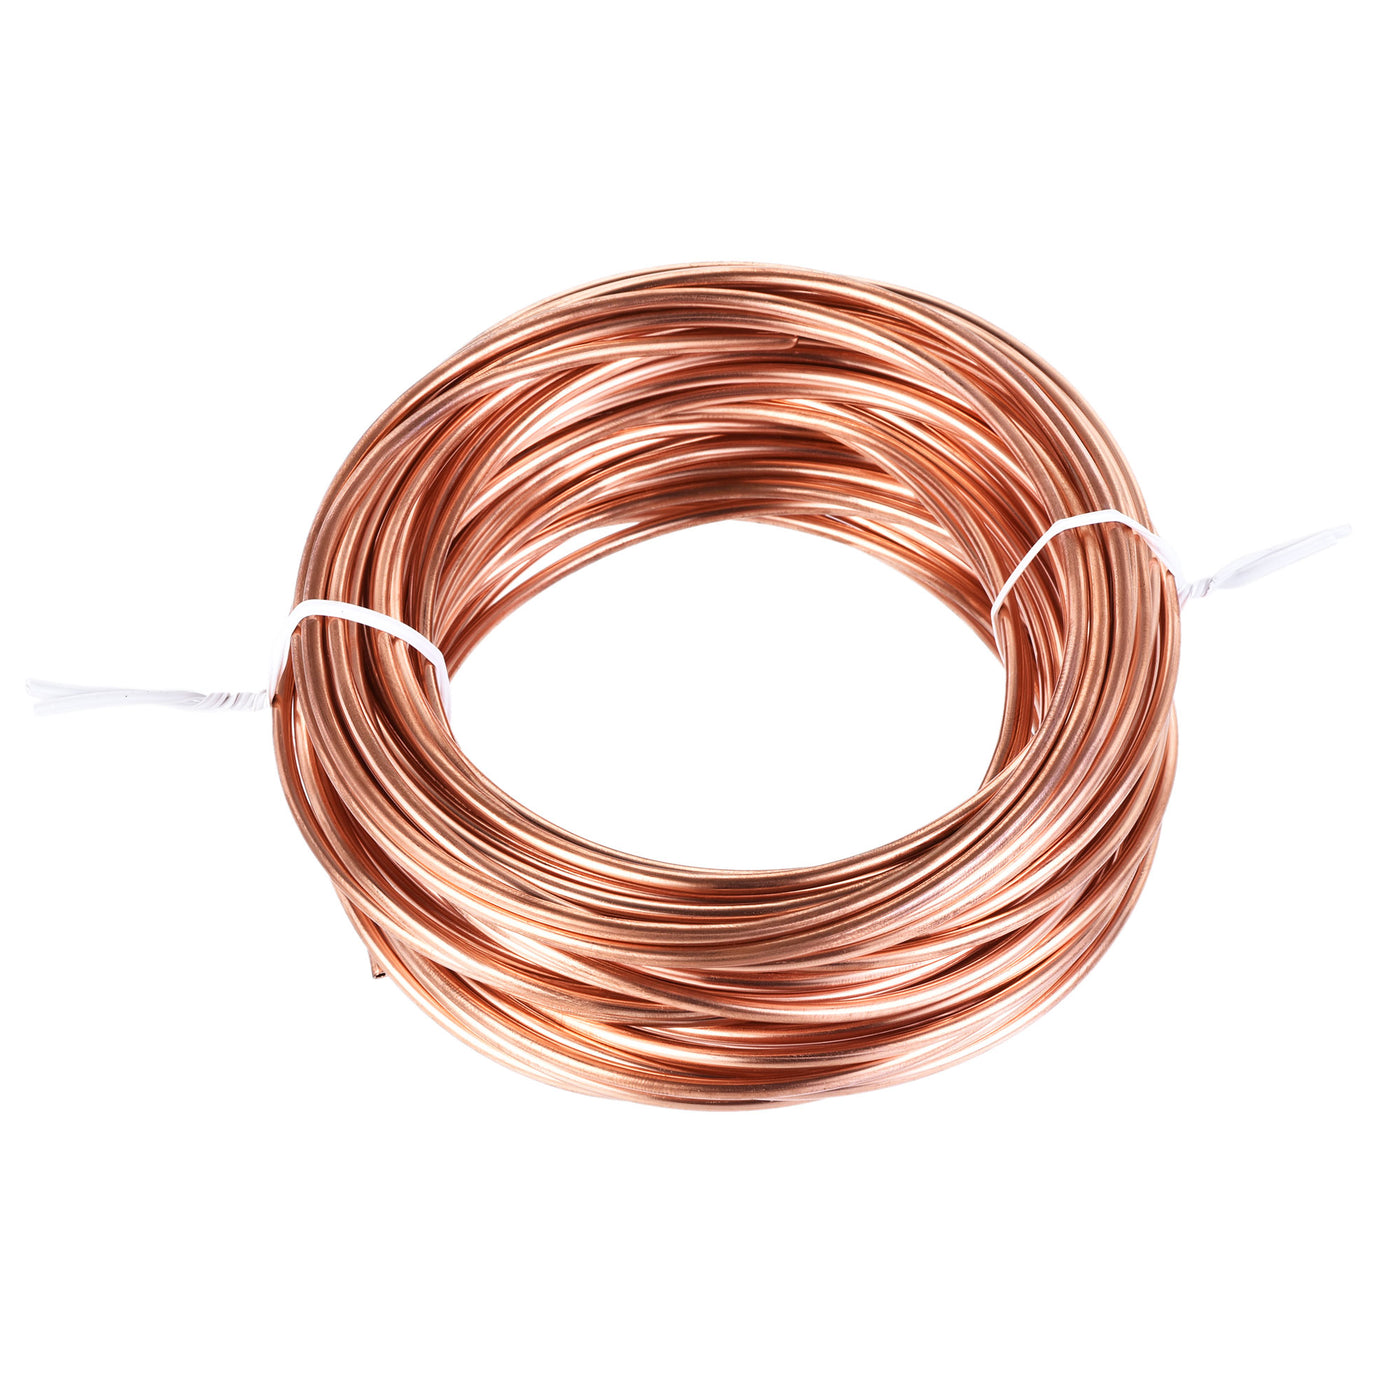 uxcell Uxcell Refrigeration Tubing 3mm OD x 2mm ID x 49Ft Length Copper Tubing Coil